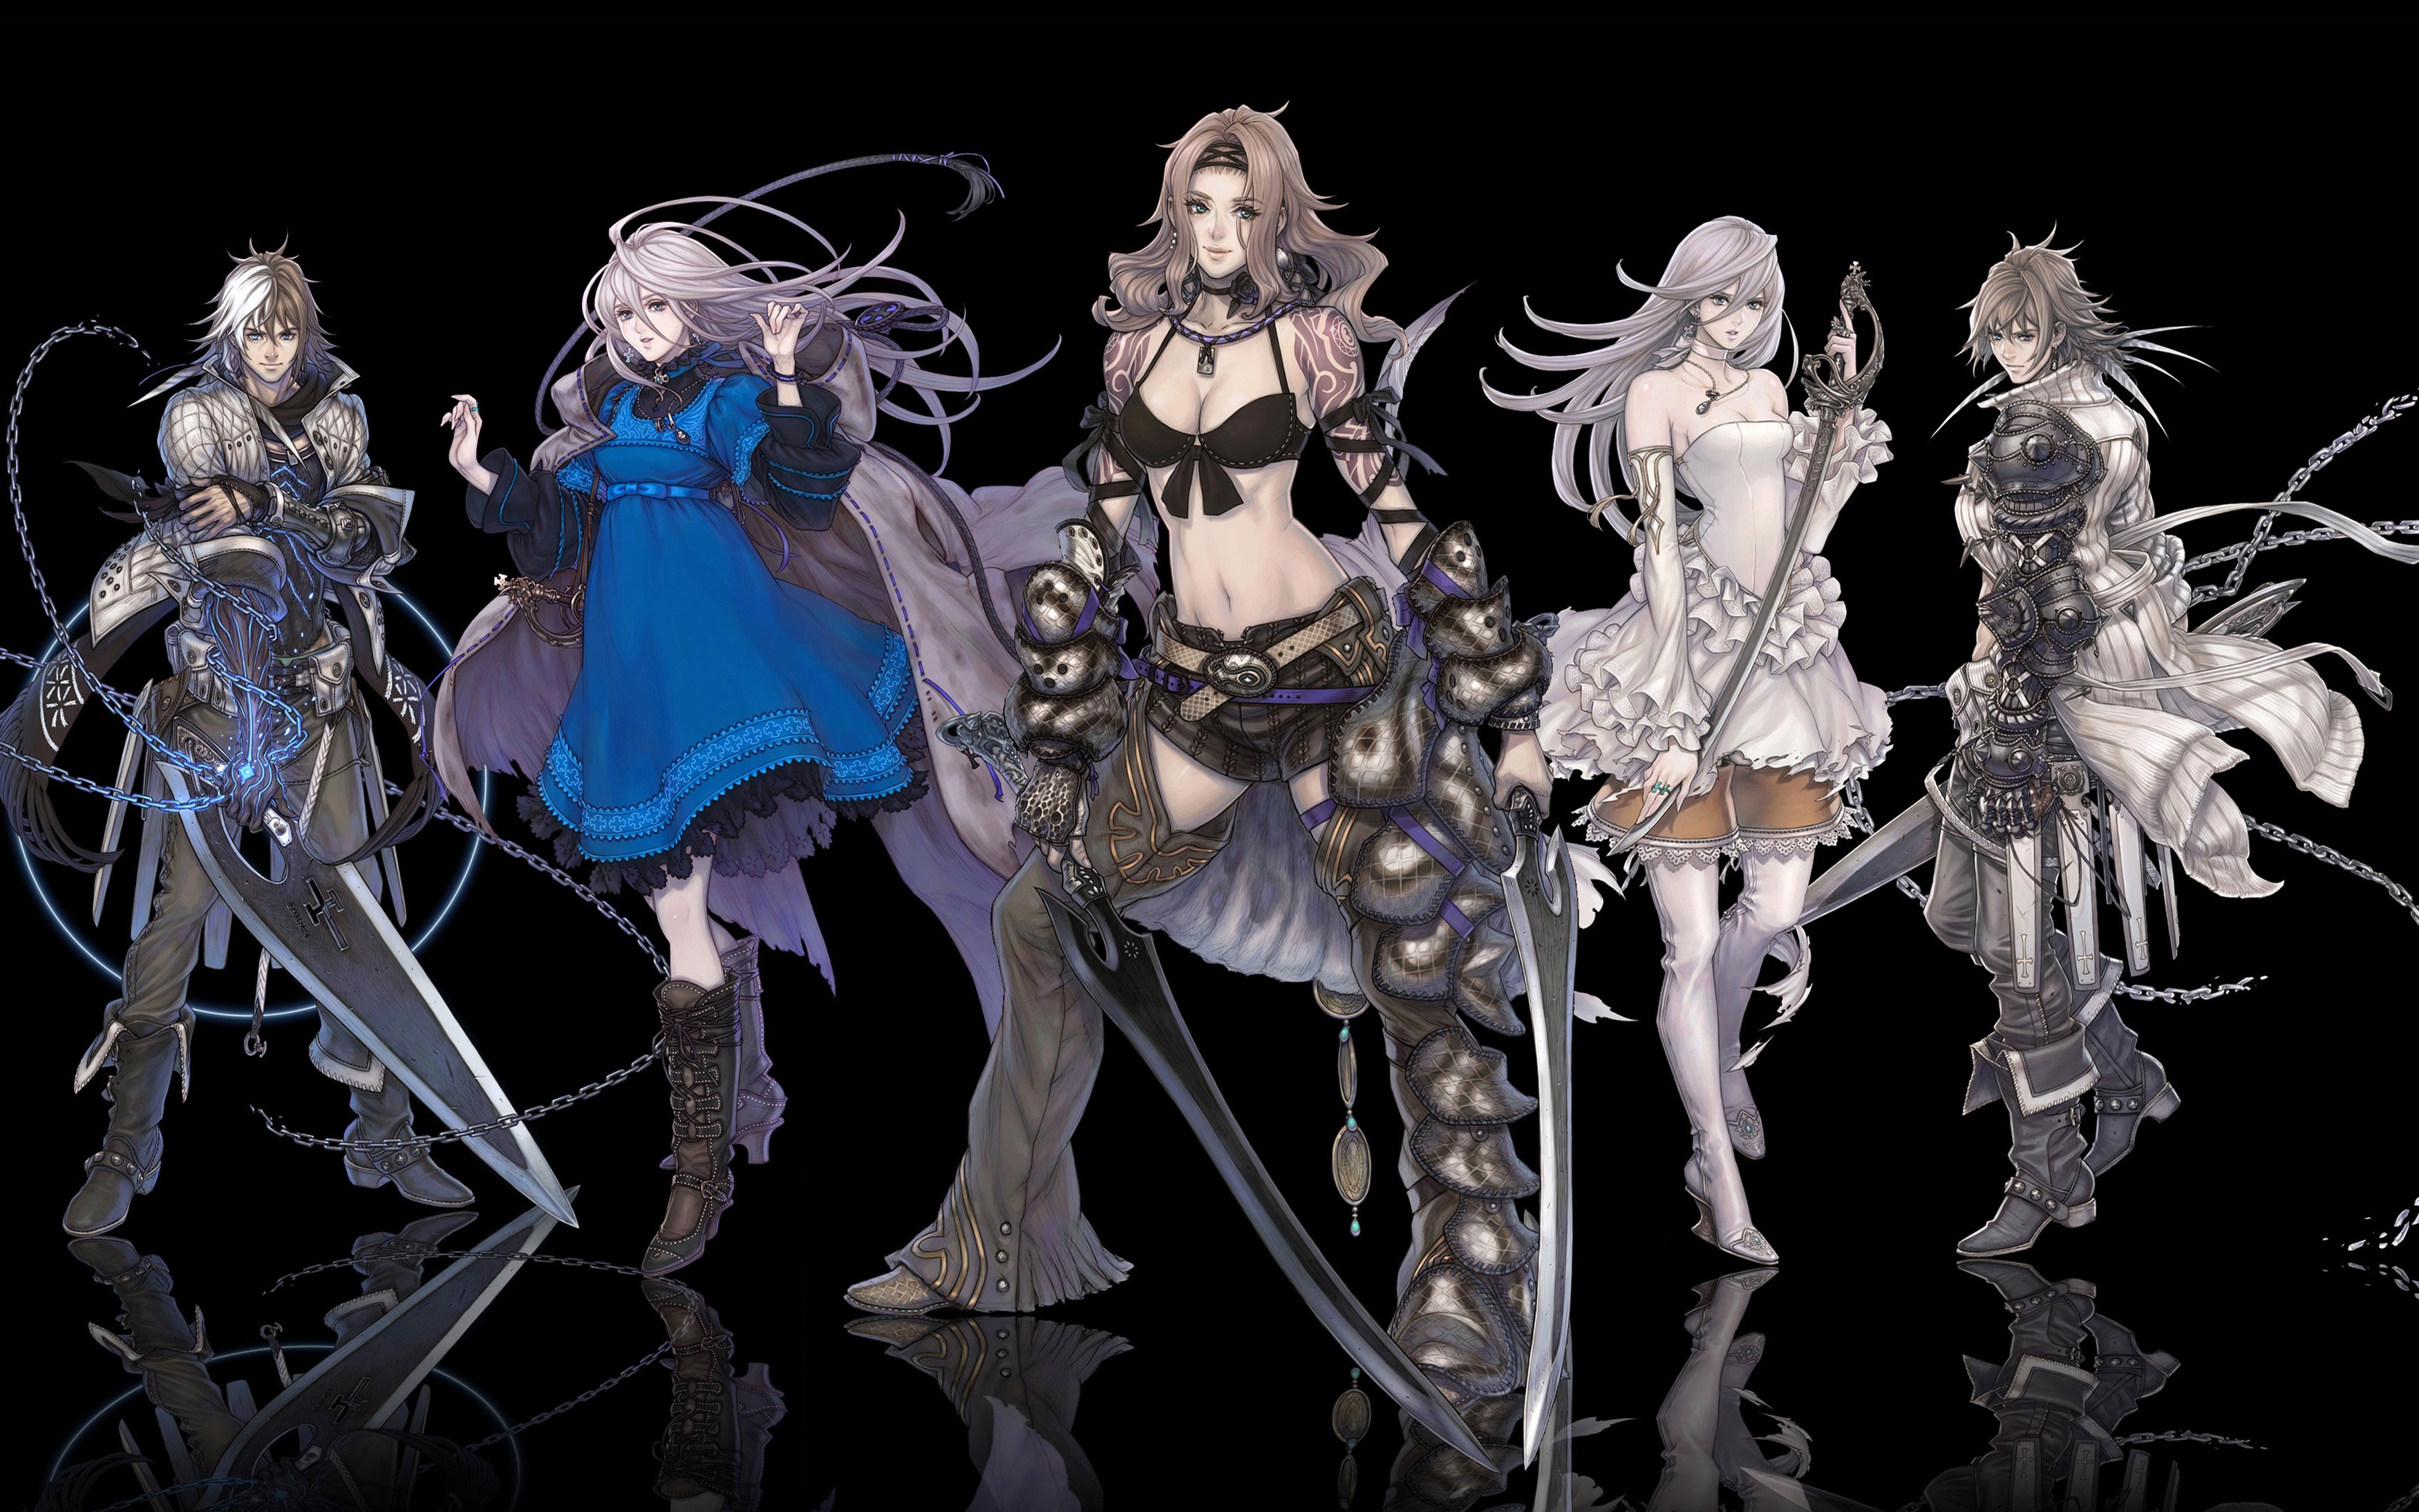 Anime 3500x2188 anime girls The Last Story anime fantasy girl anime boys fantasy art boobs cleavage women with swords sword weapon simple background black background reflection bra belly dress women trio